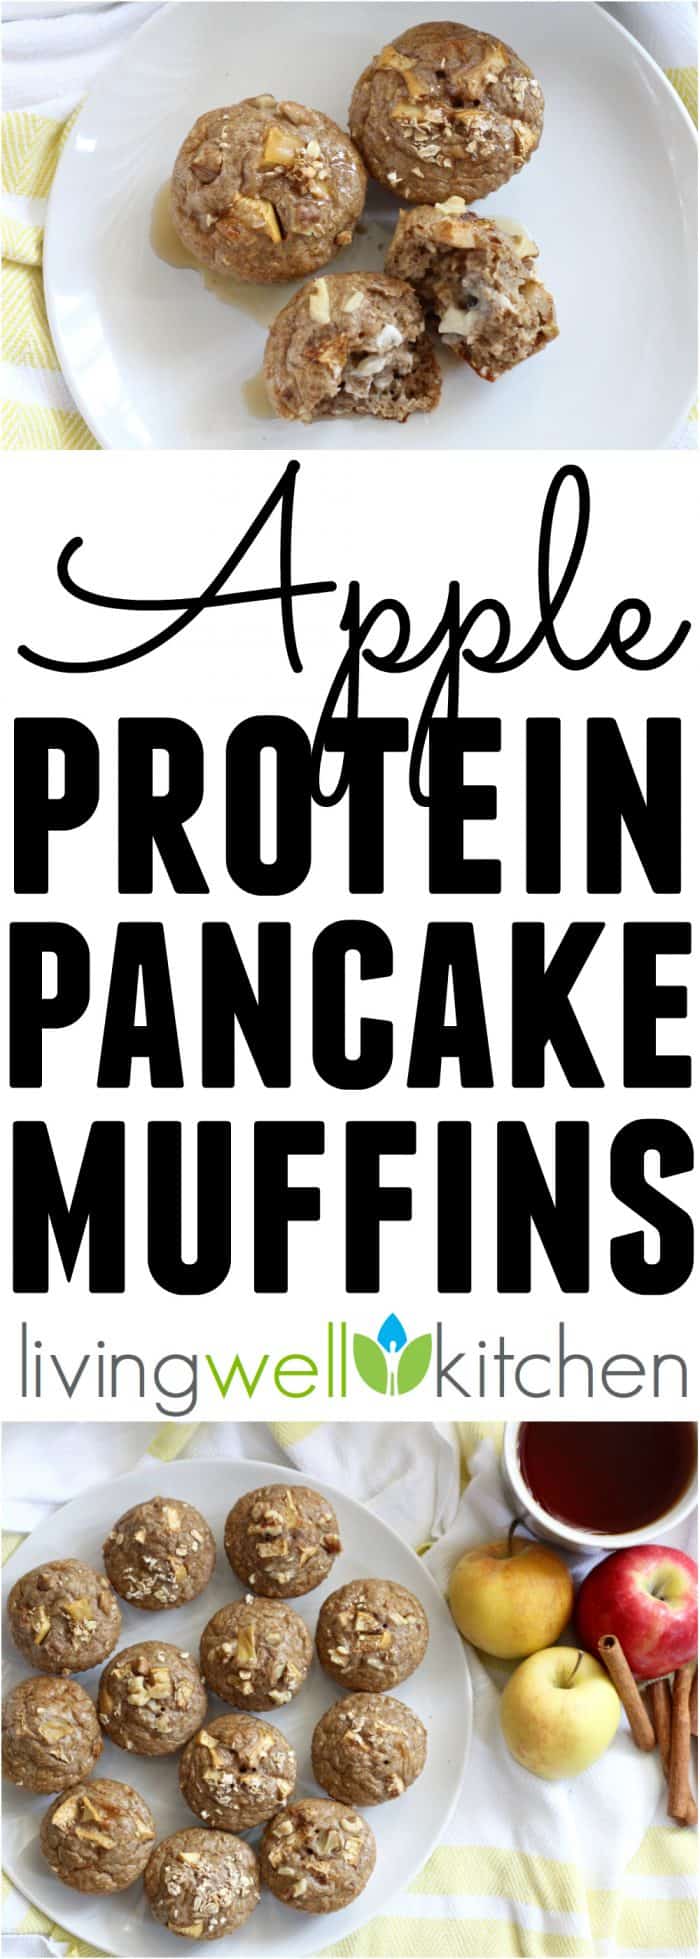 Apple spice protein pancakes in muffin form from @memeinge are a great make-ahead breakfast recipe. These gluten free, no sugar added, high protein pancakes are a delicious and filling way to start your day!